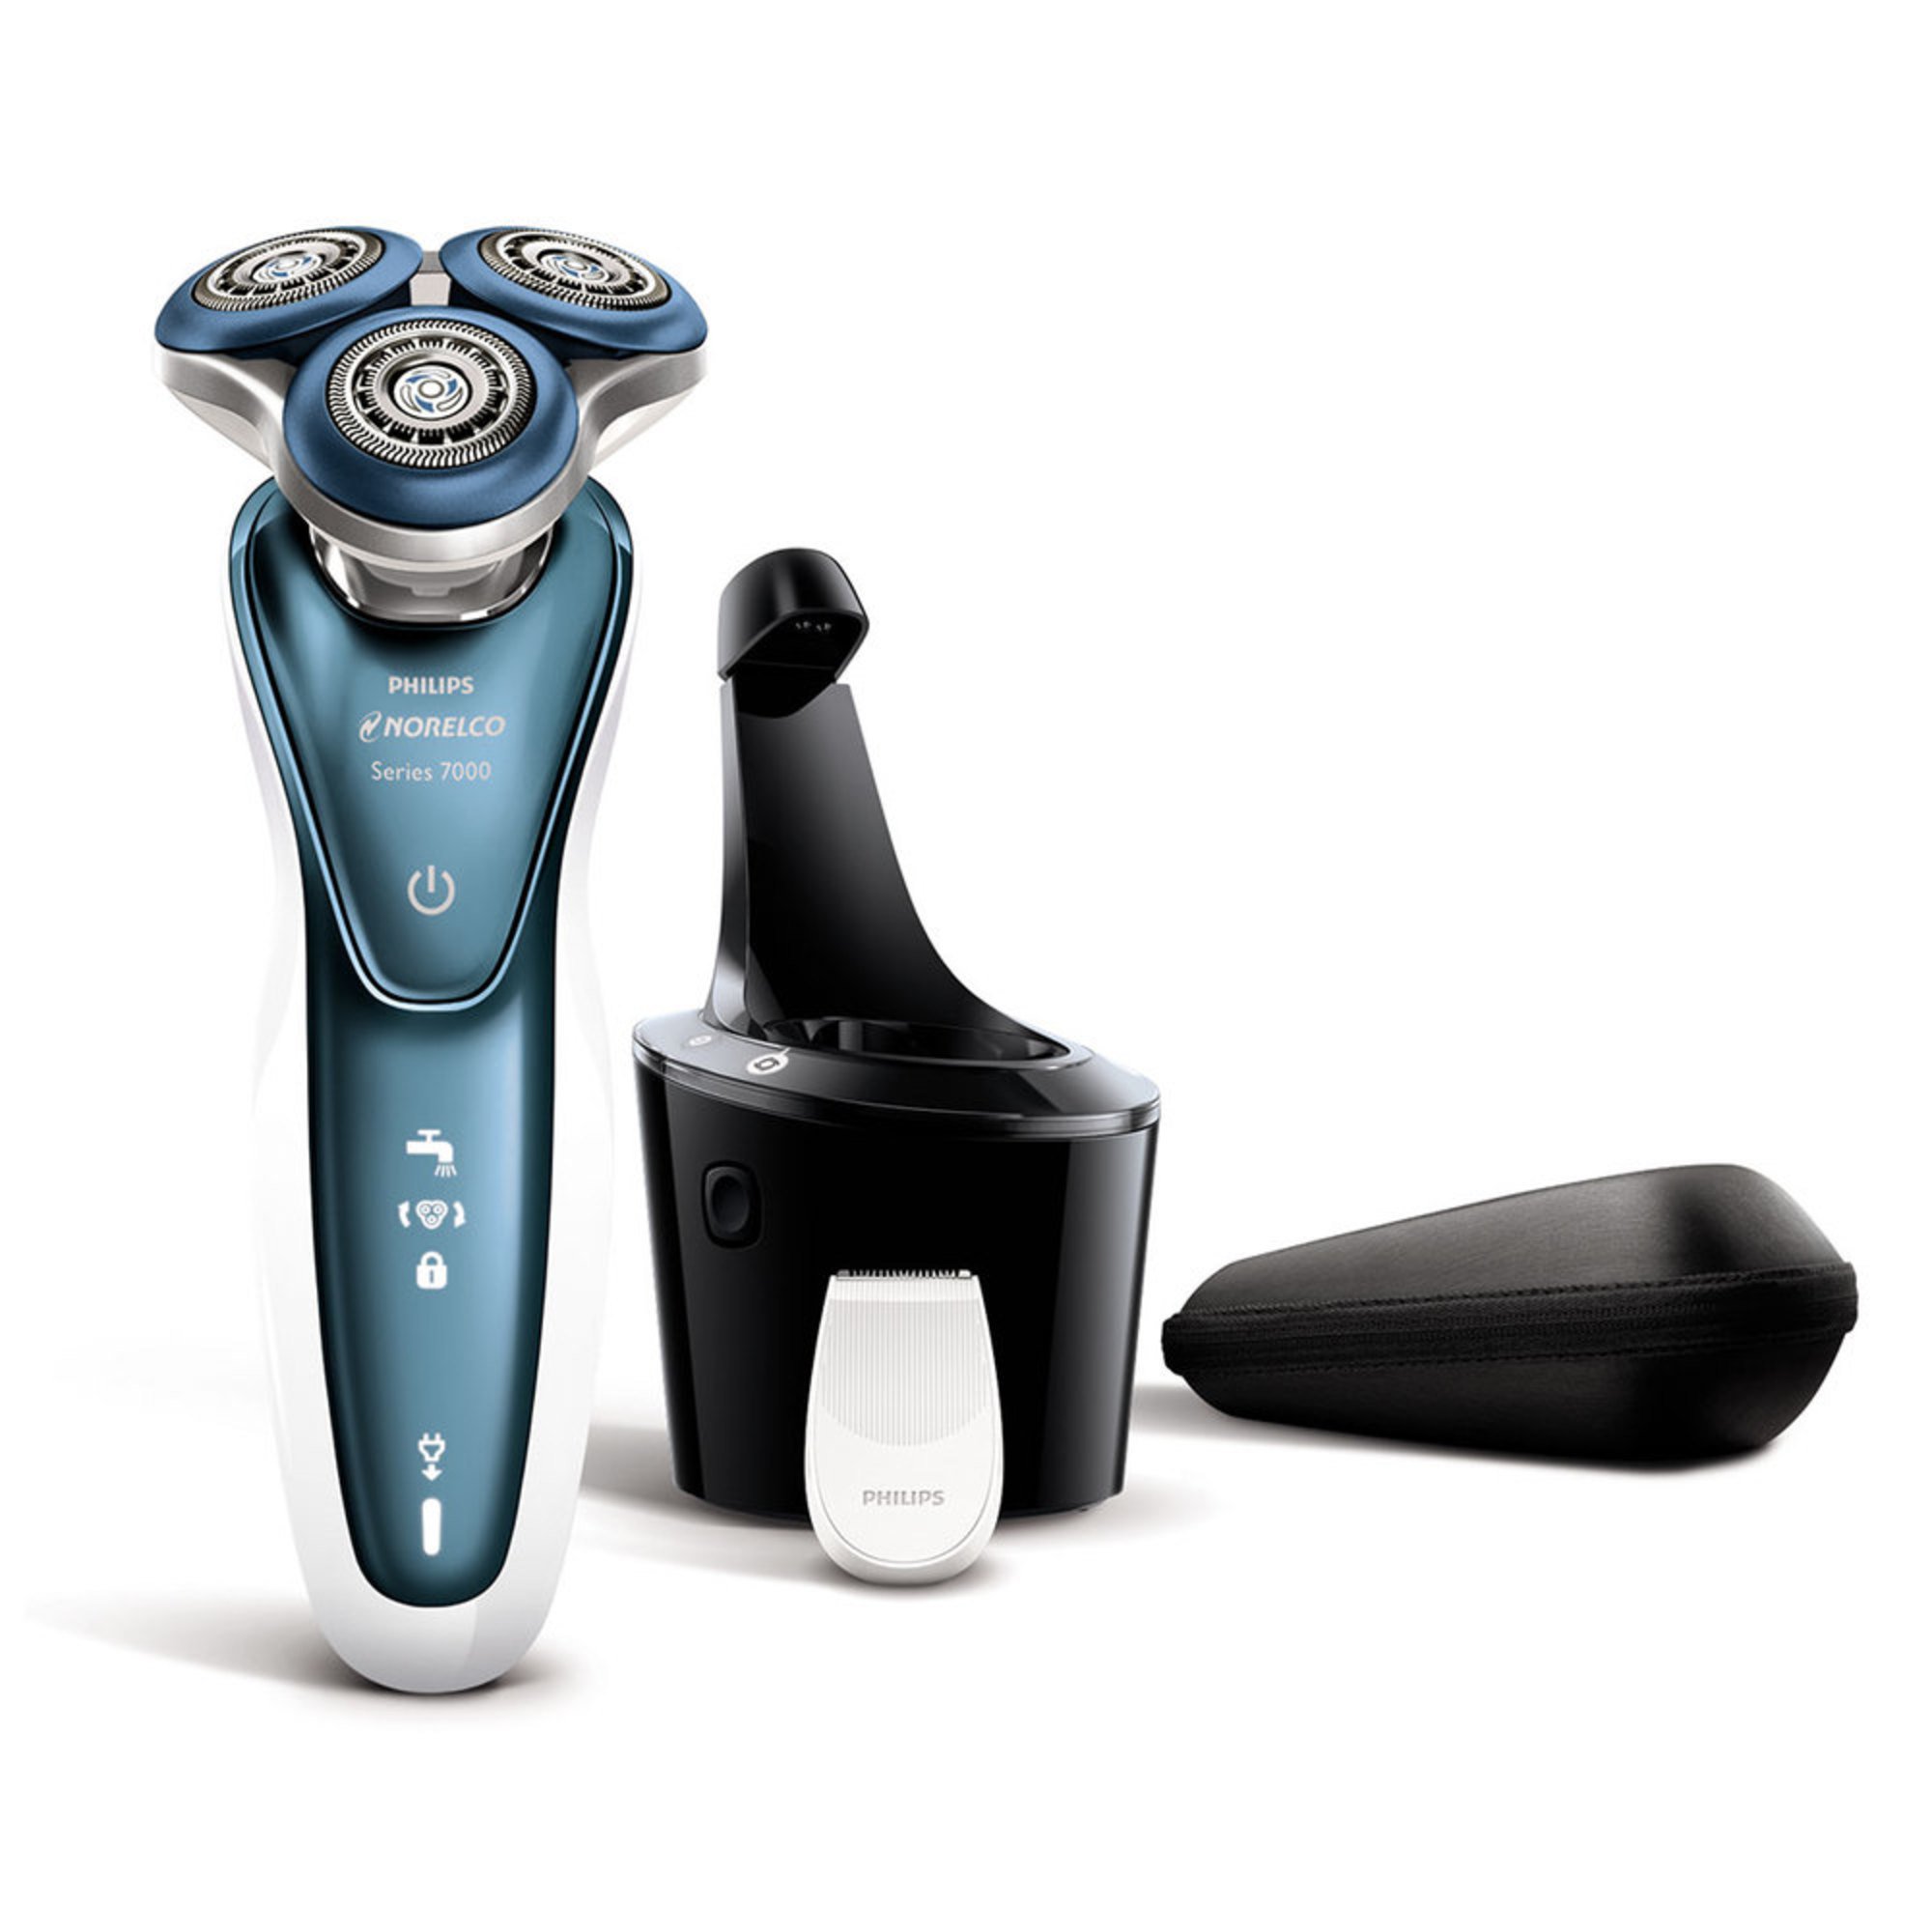 Philips Norelco Shaver Rebate Form